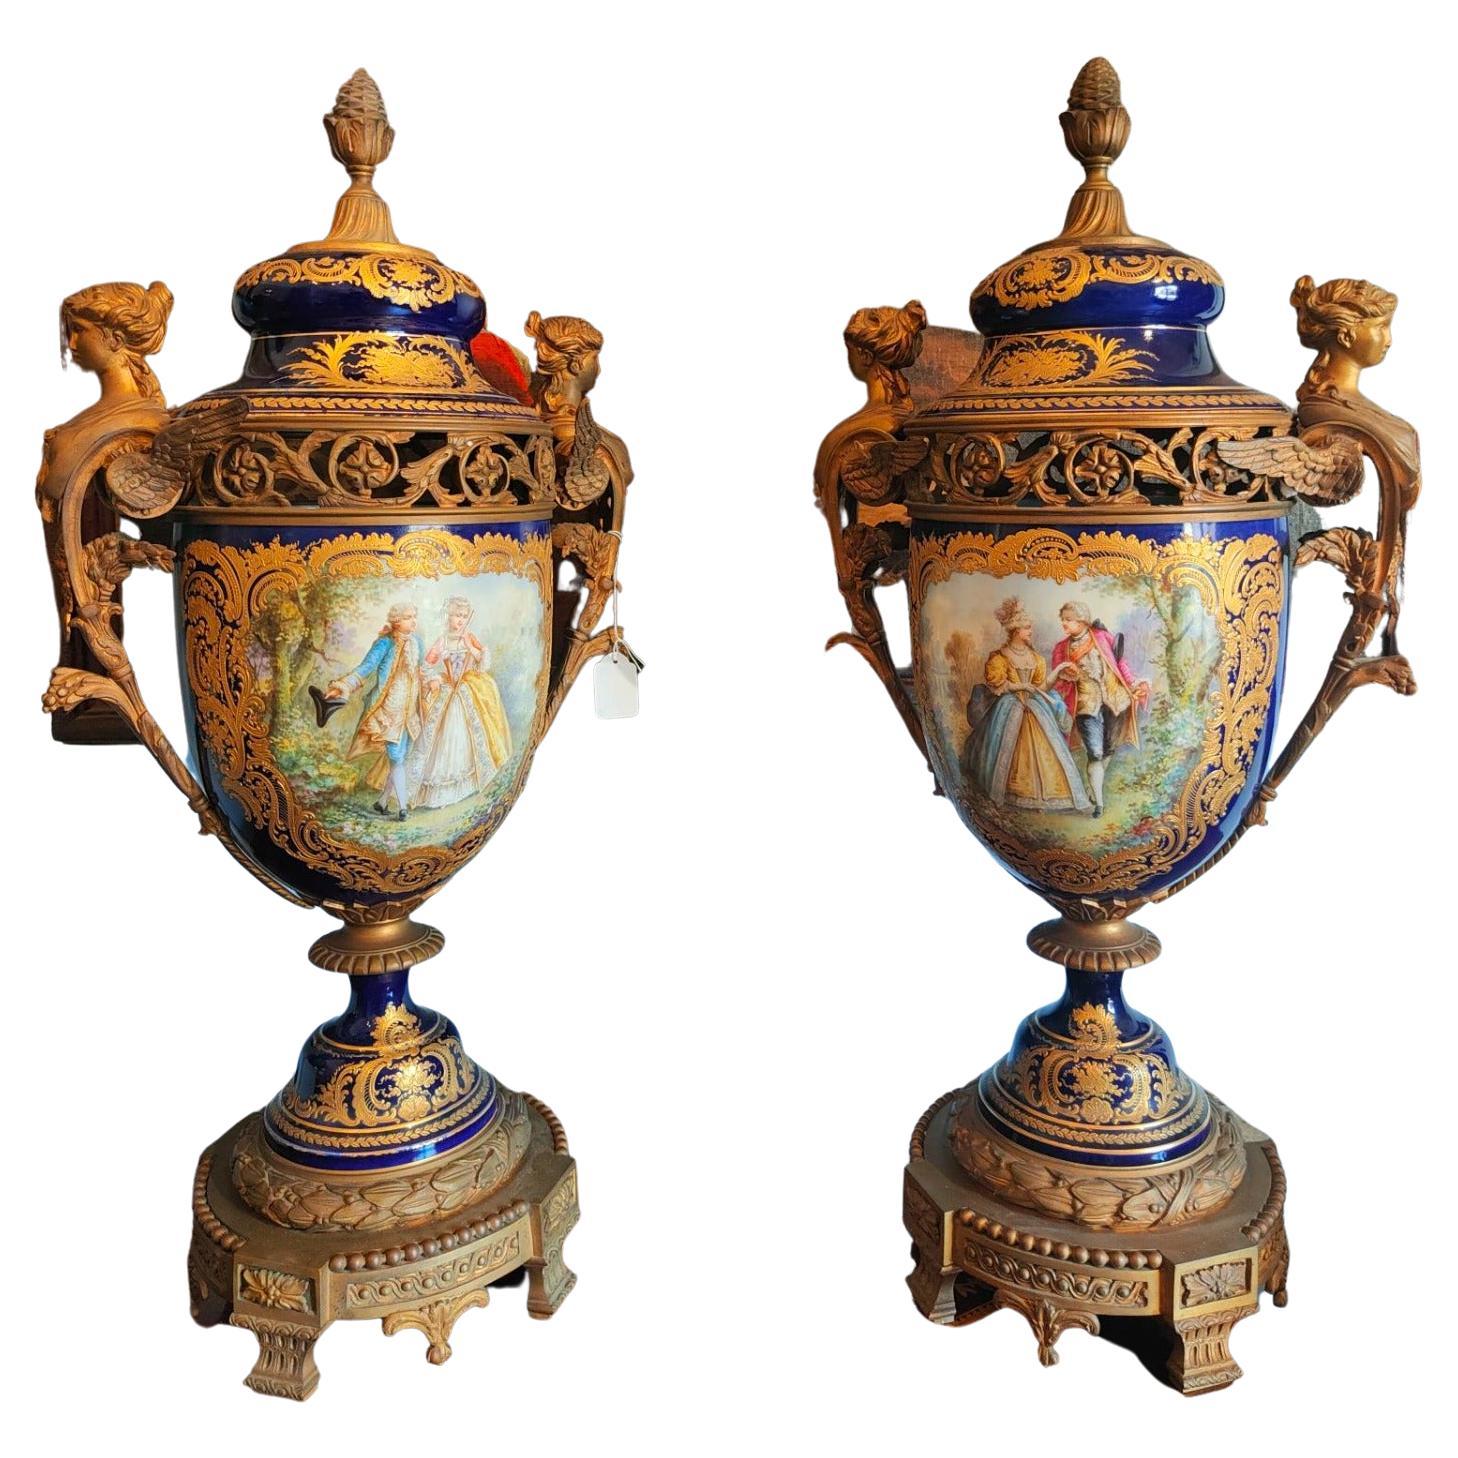 Large and Important Pair of Sèvres Porcelain Vases